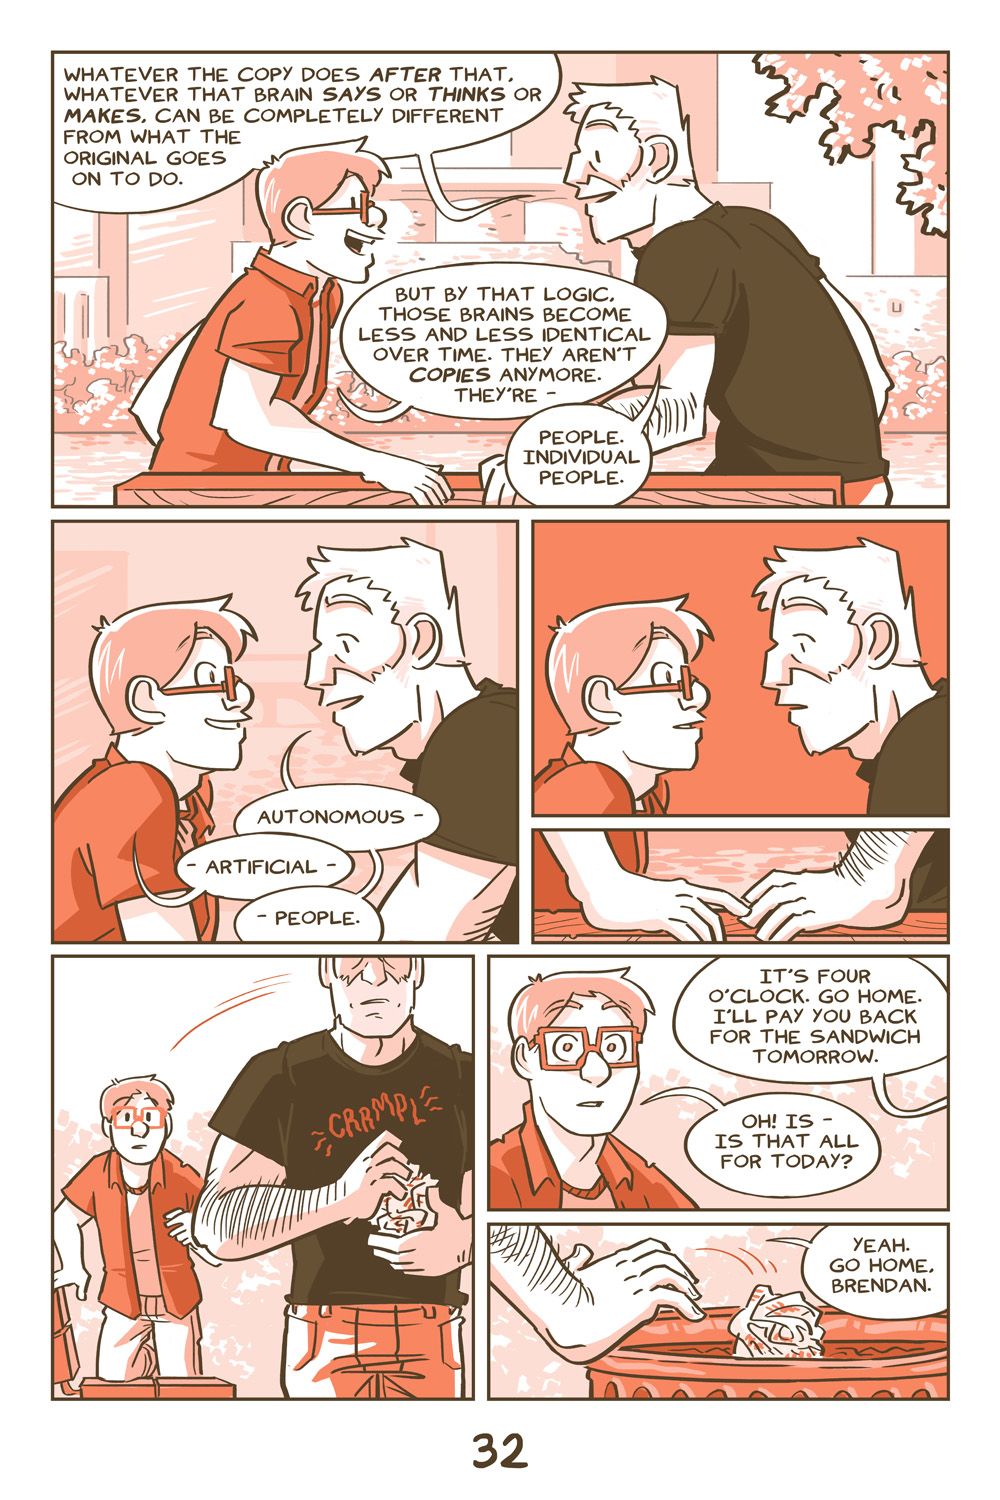 Chapter 2, Page 32